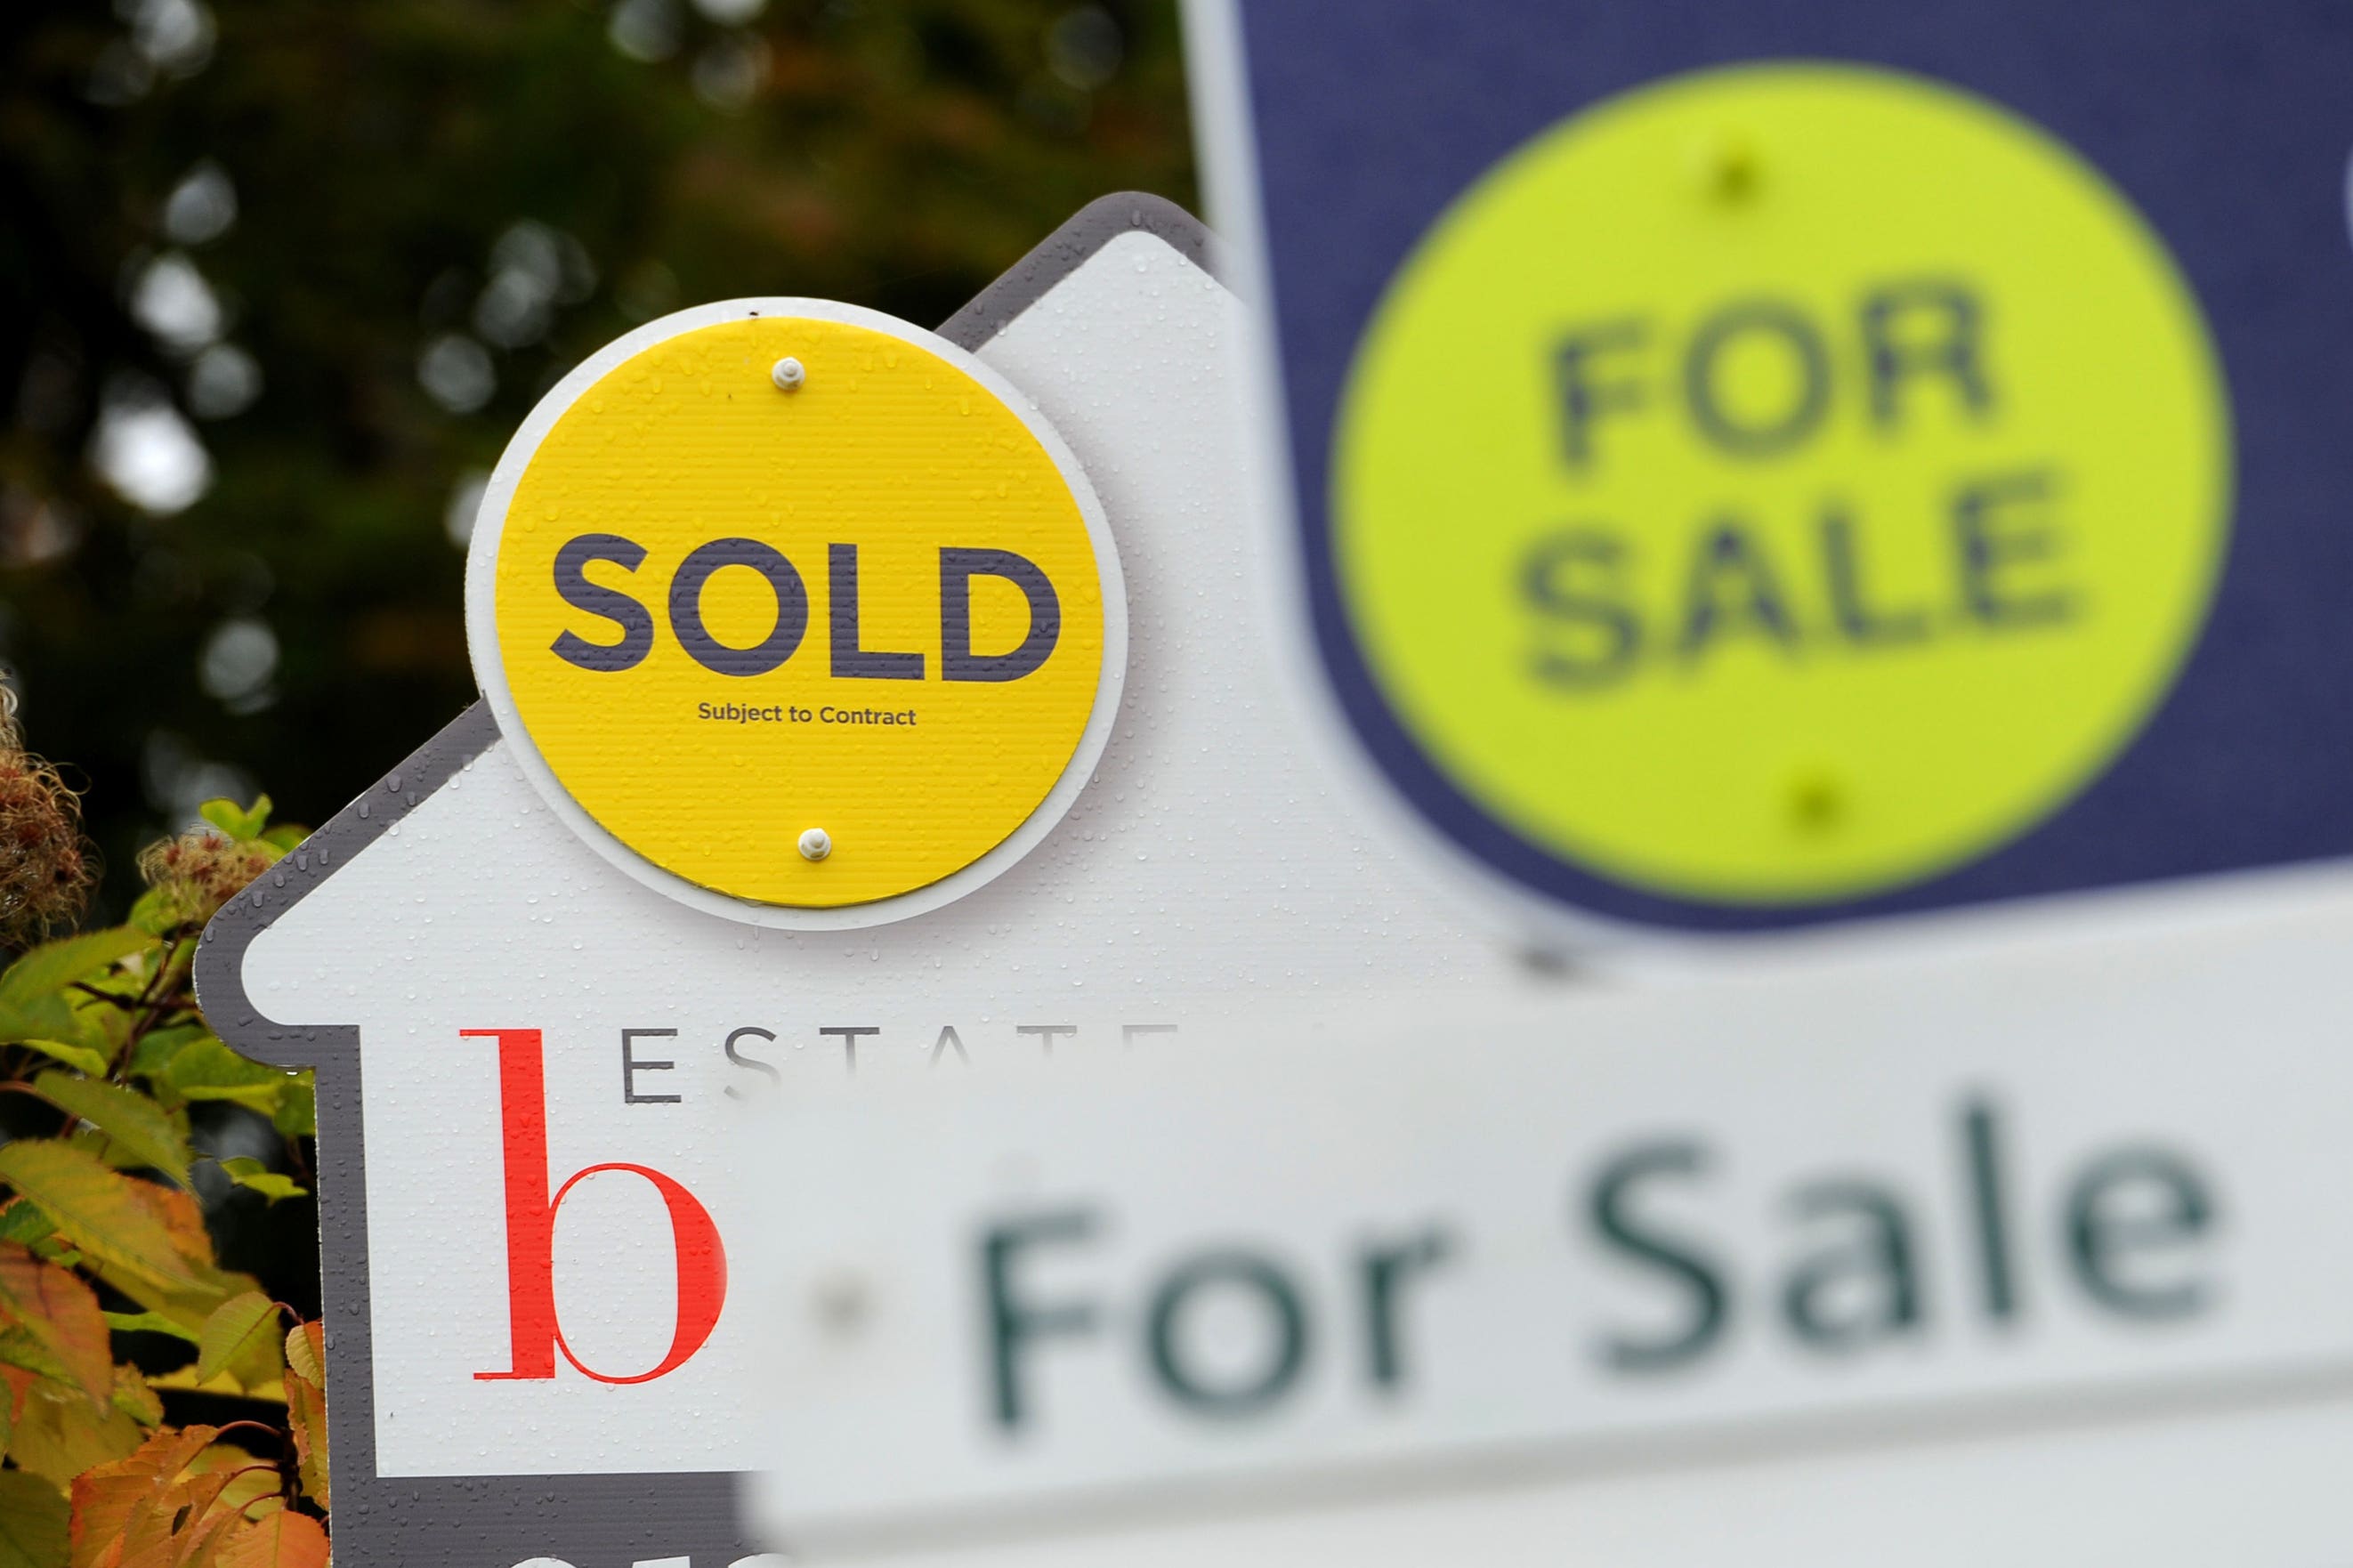 Nationwide research showed that the upcoming general election is unlikely to hugely affect house prices